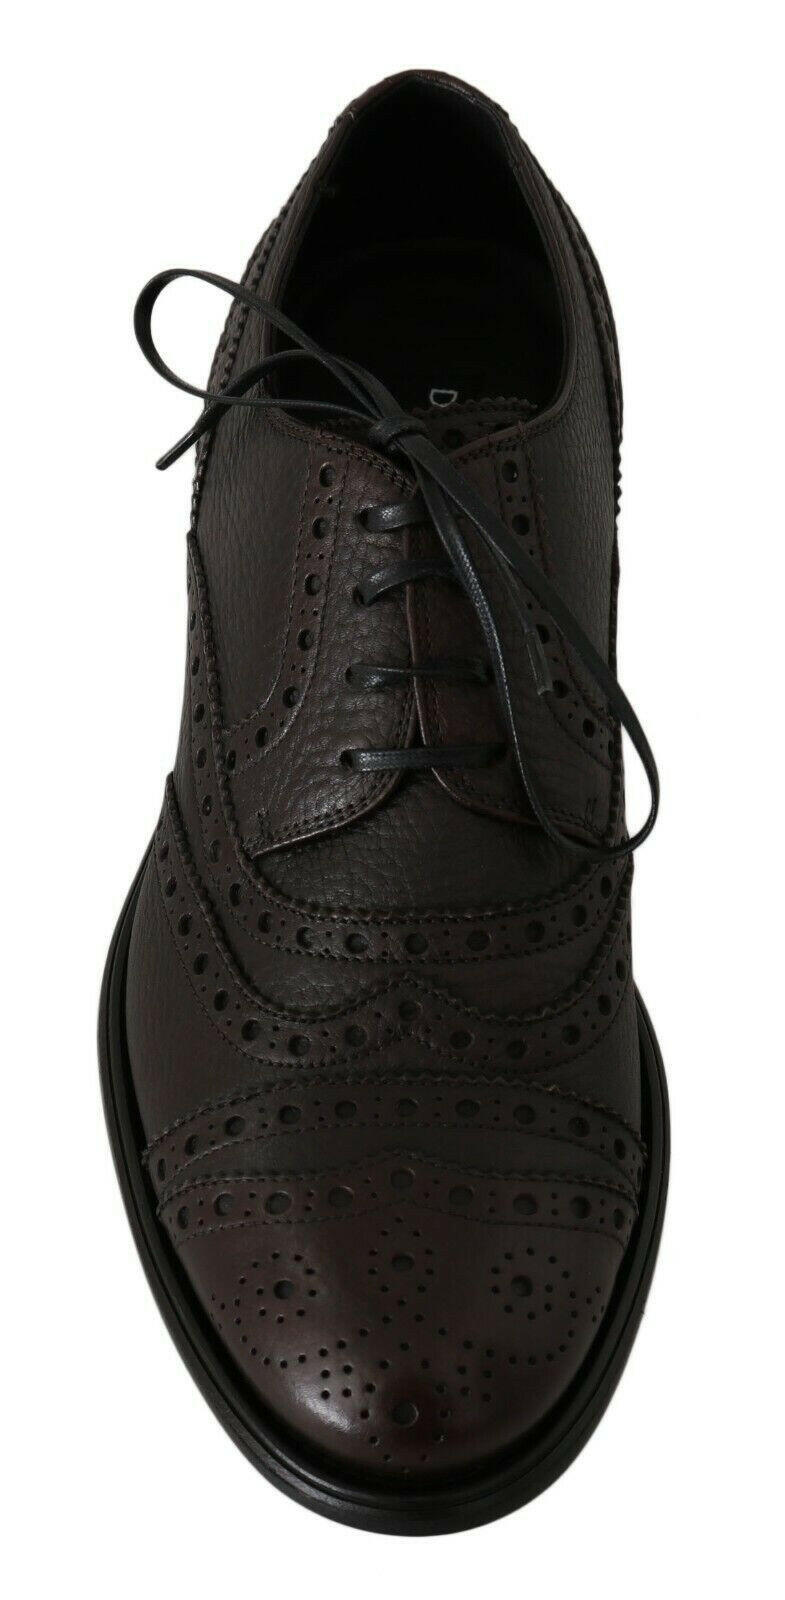 Dolce & Gabbana Brown Leather Wingtip Derby Formal Shoes - GENUINE AUTHENTIC BRAND LLC  